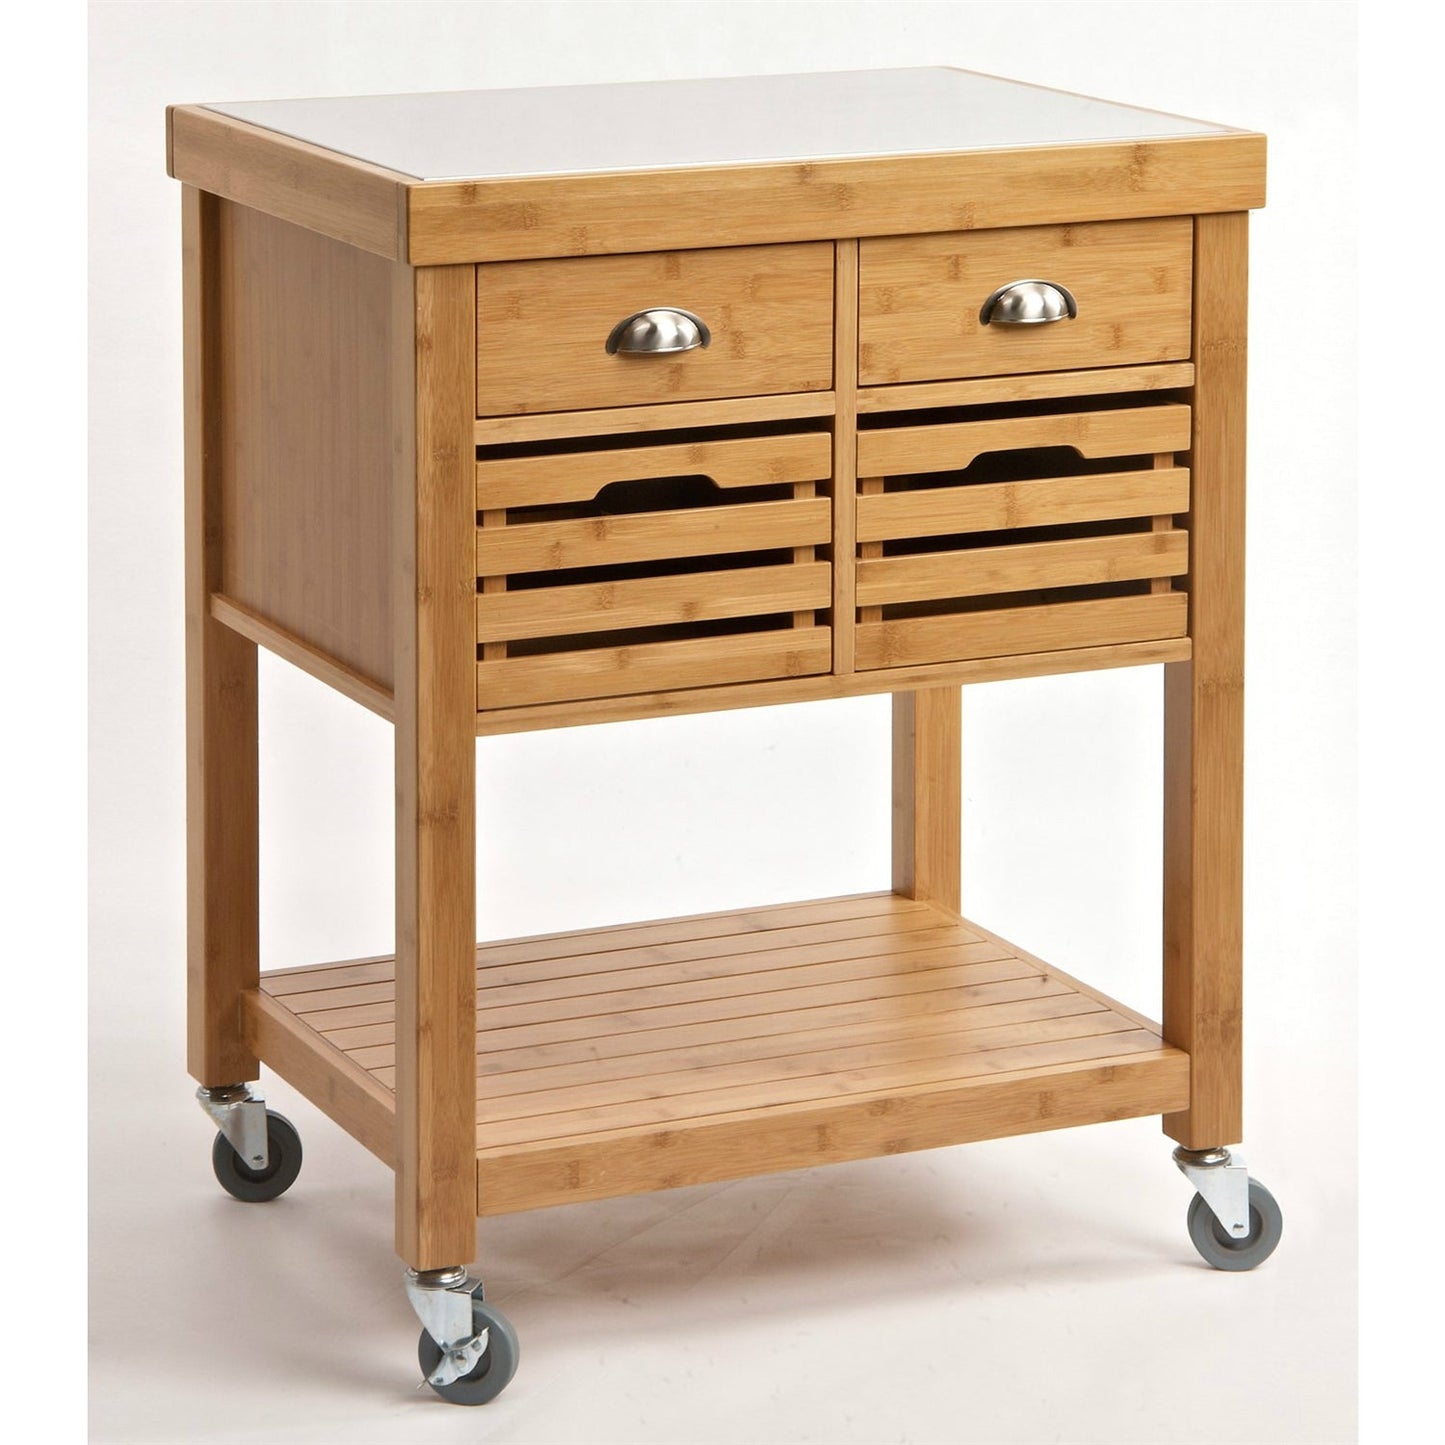 Kitchen > Kitchen Carts - Stainless Steel Top Bamboo Wood Kitchen Cart With Casters